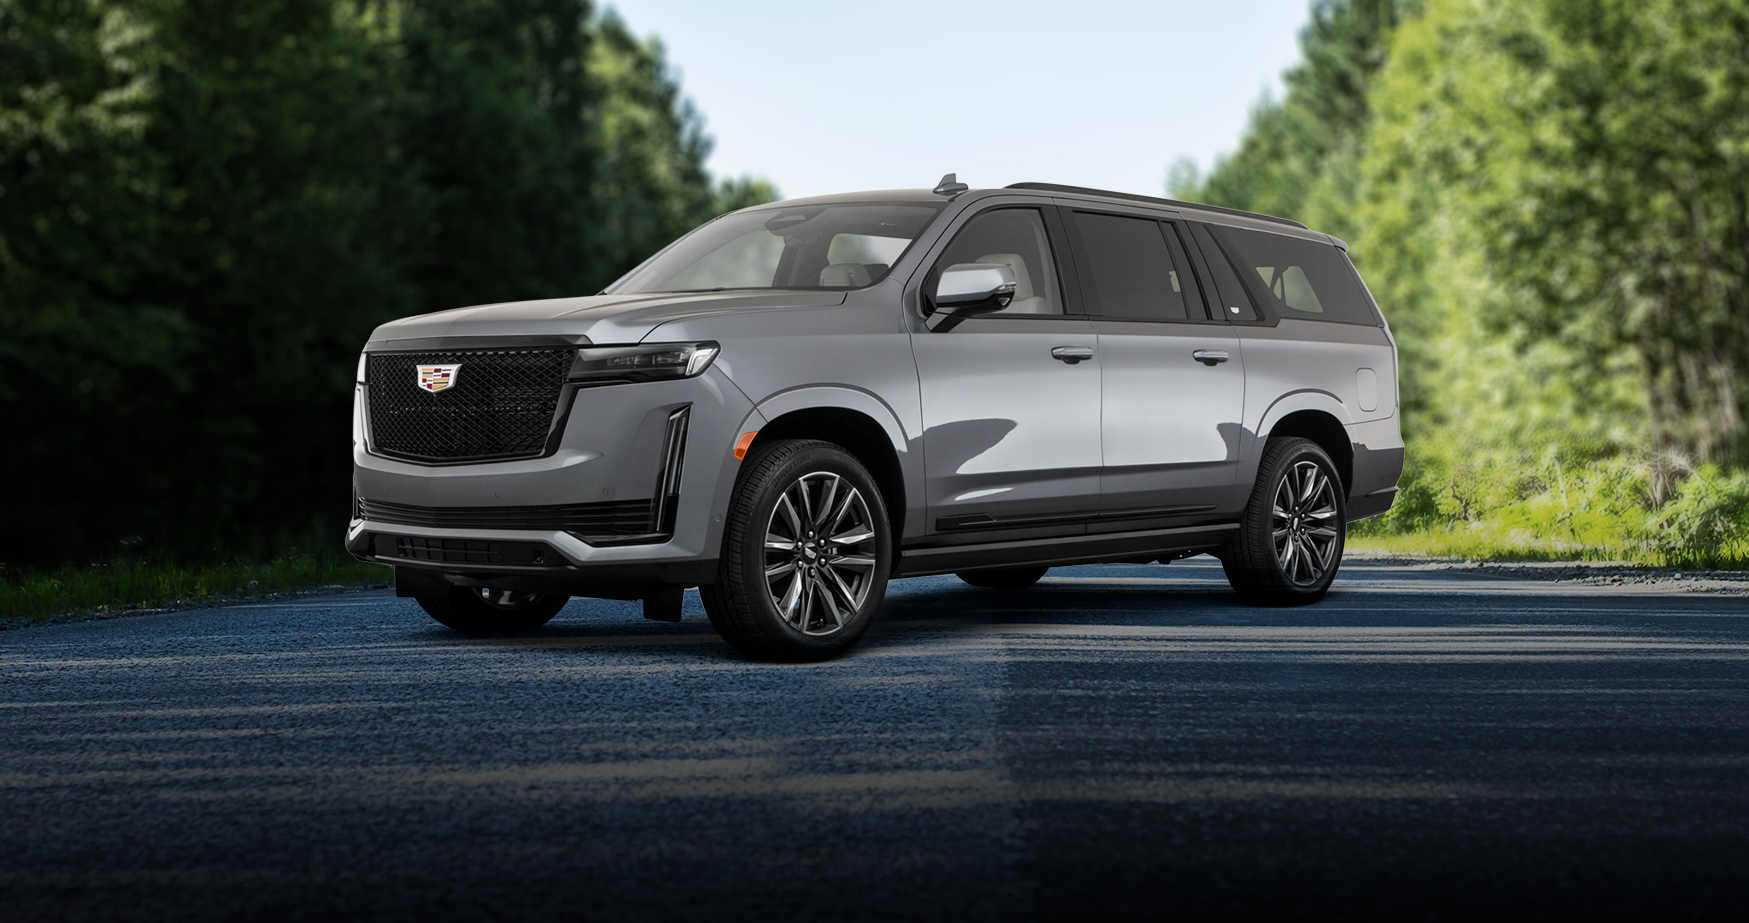 Come and test drive one of the best luxury SUVs for 2022 at your local Cadillac dealership Courtesy Cadillac in Louisville, Kentucky